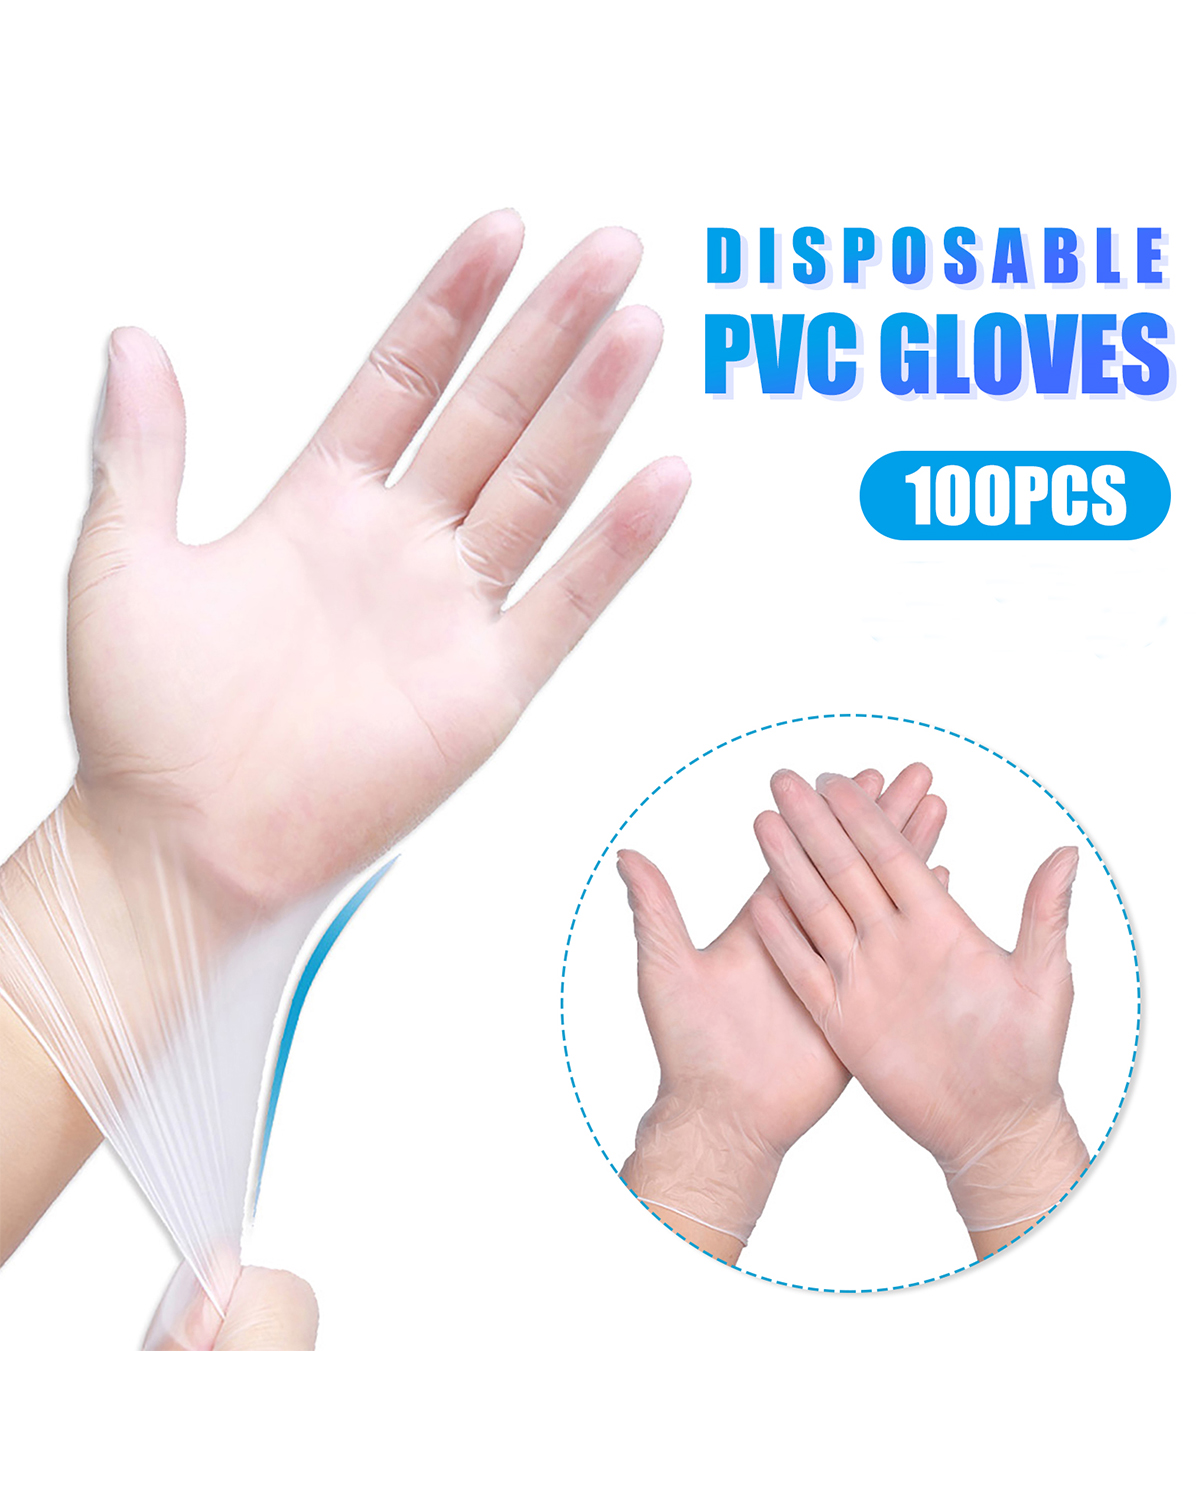 100pcs Disposable Protective Gloves Waterproof Oil-resistant Safety Food Grade Glove